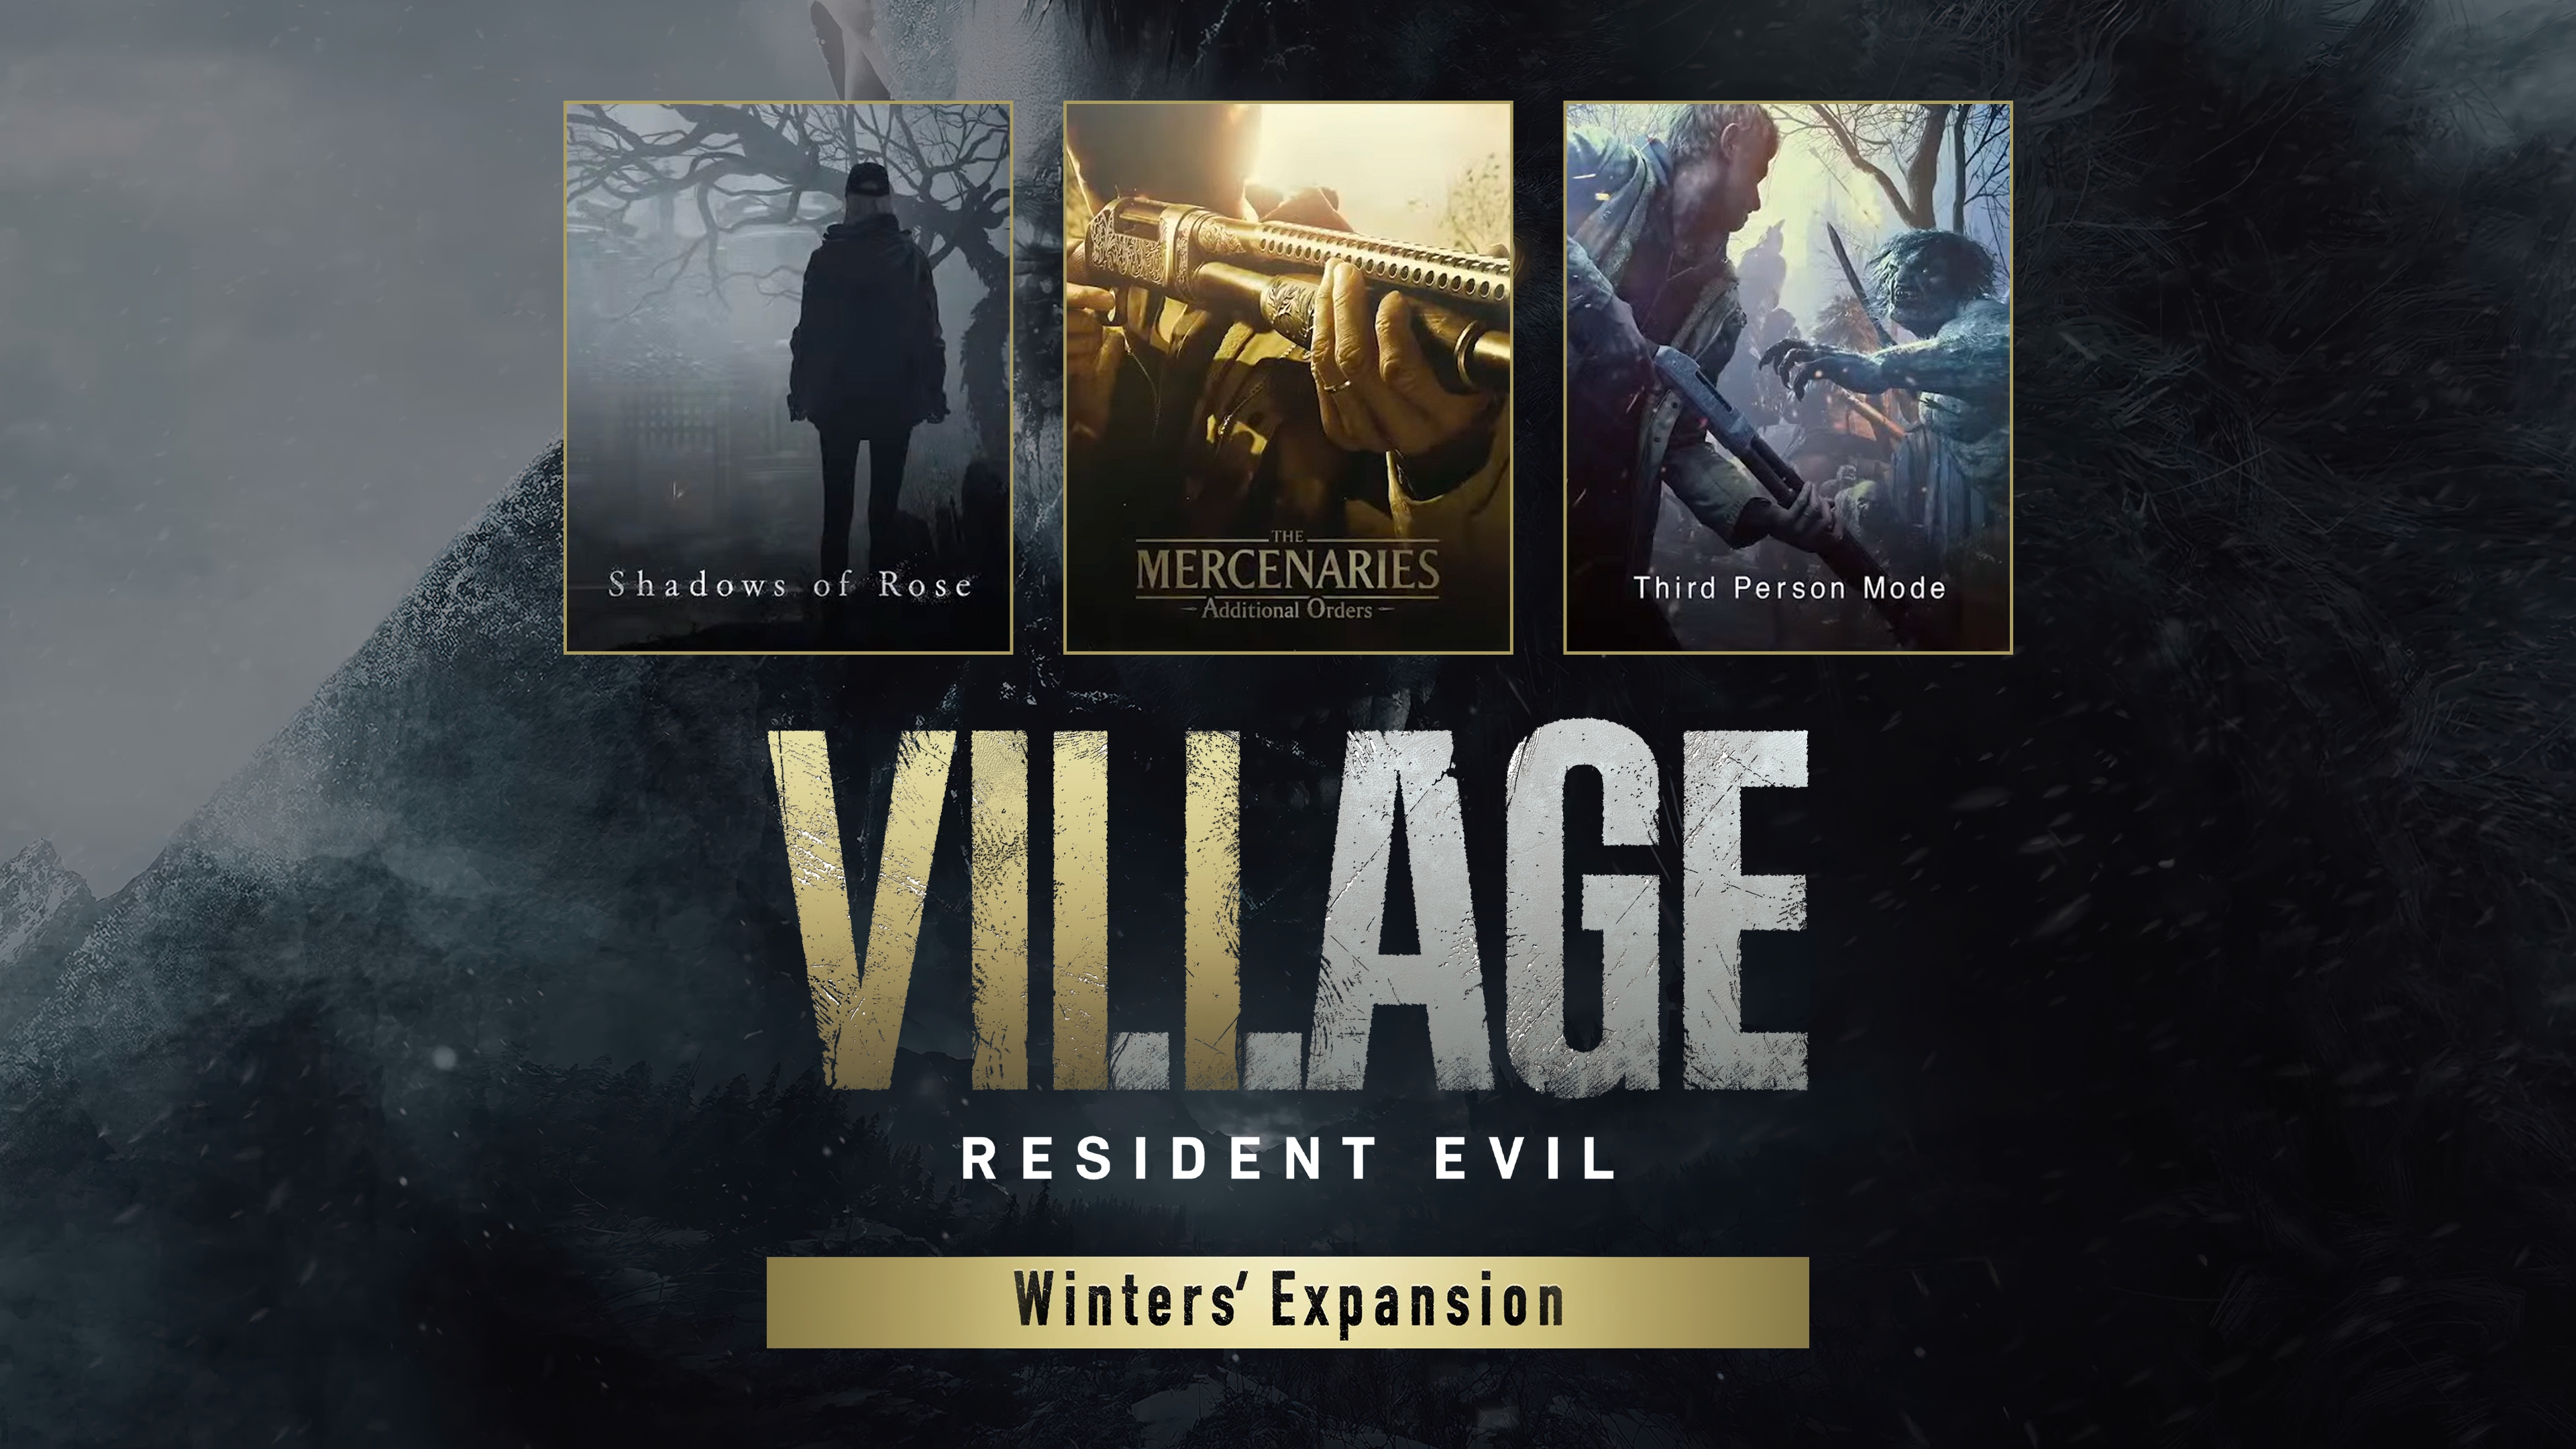 https://gaming-cdn.com/images/products/12638/orig/resident-evil-village-winters-expansion-pc-game-steam-cover.jpg?v=1683704478